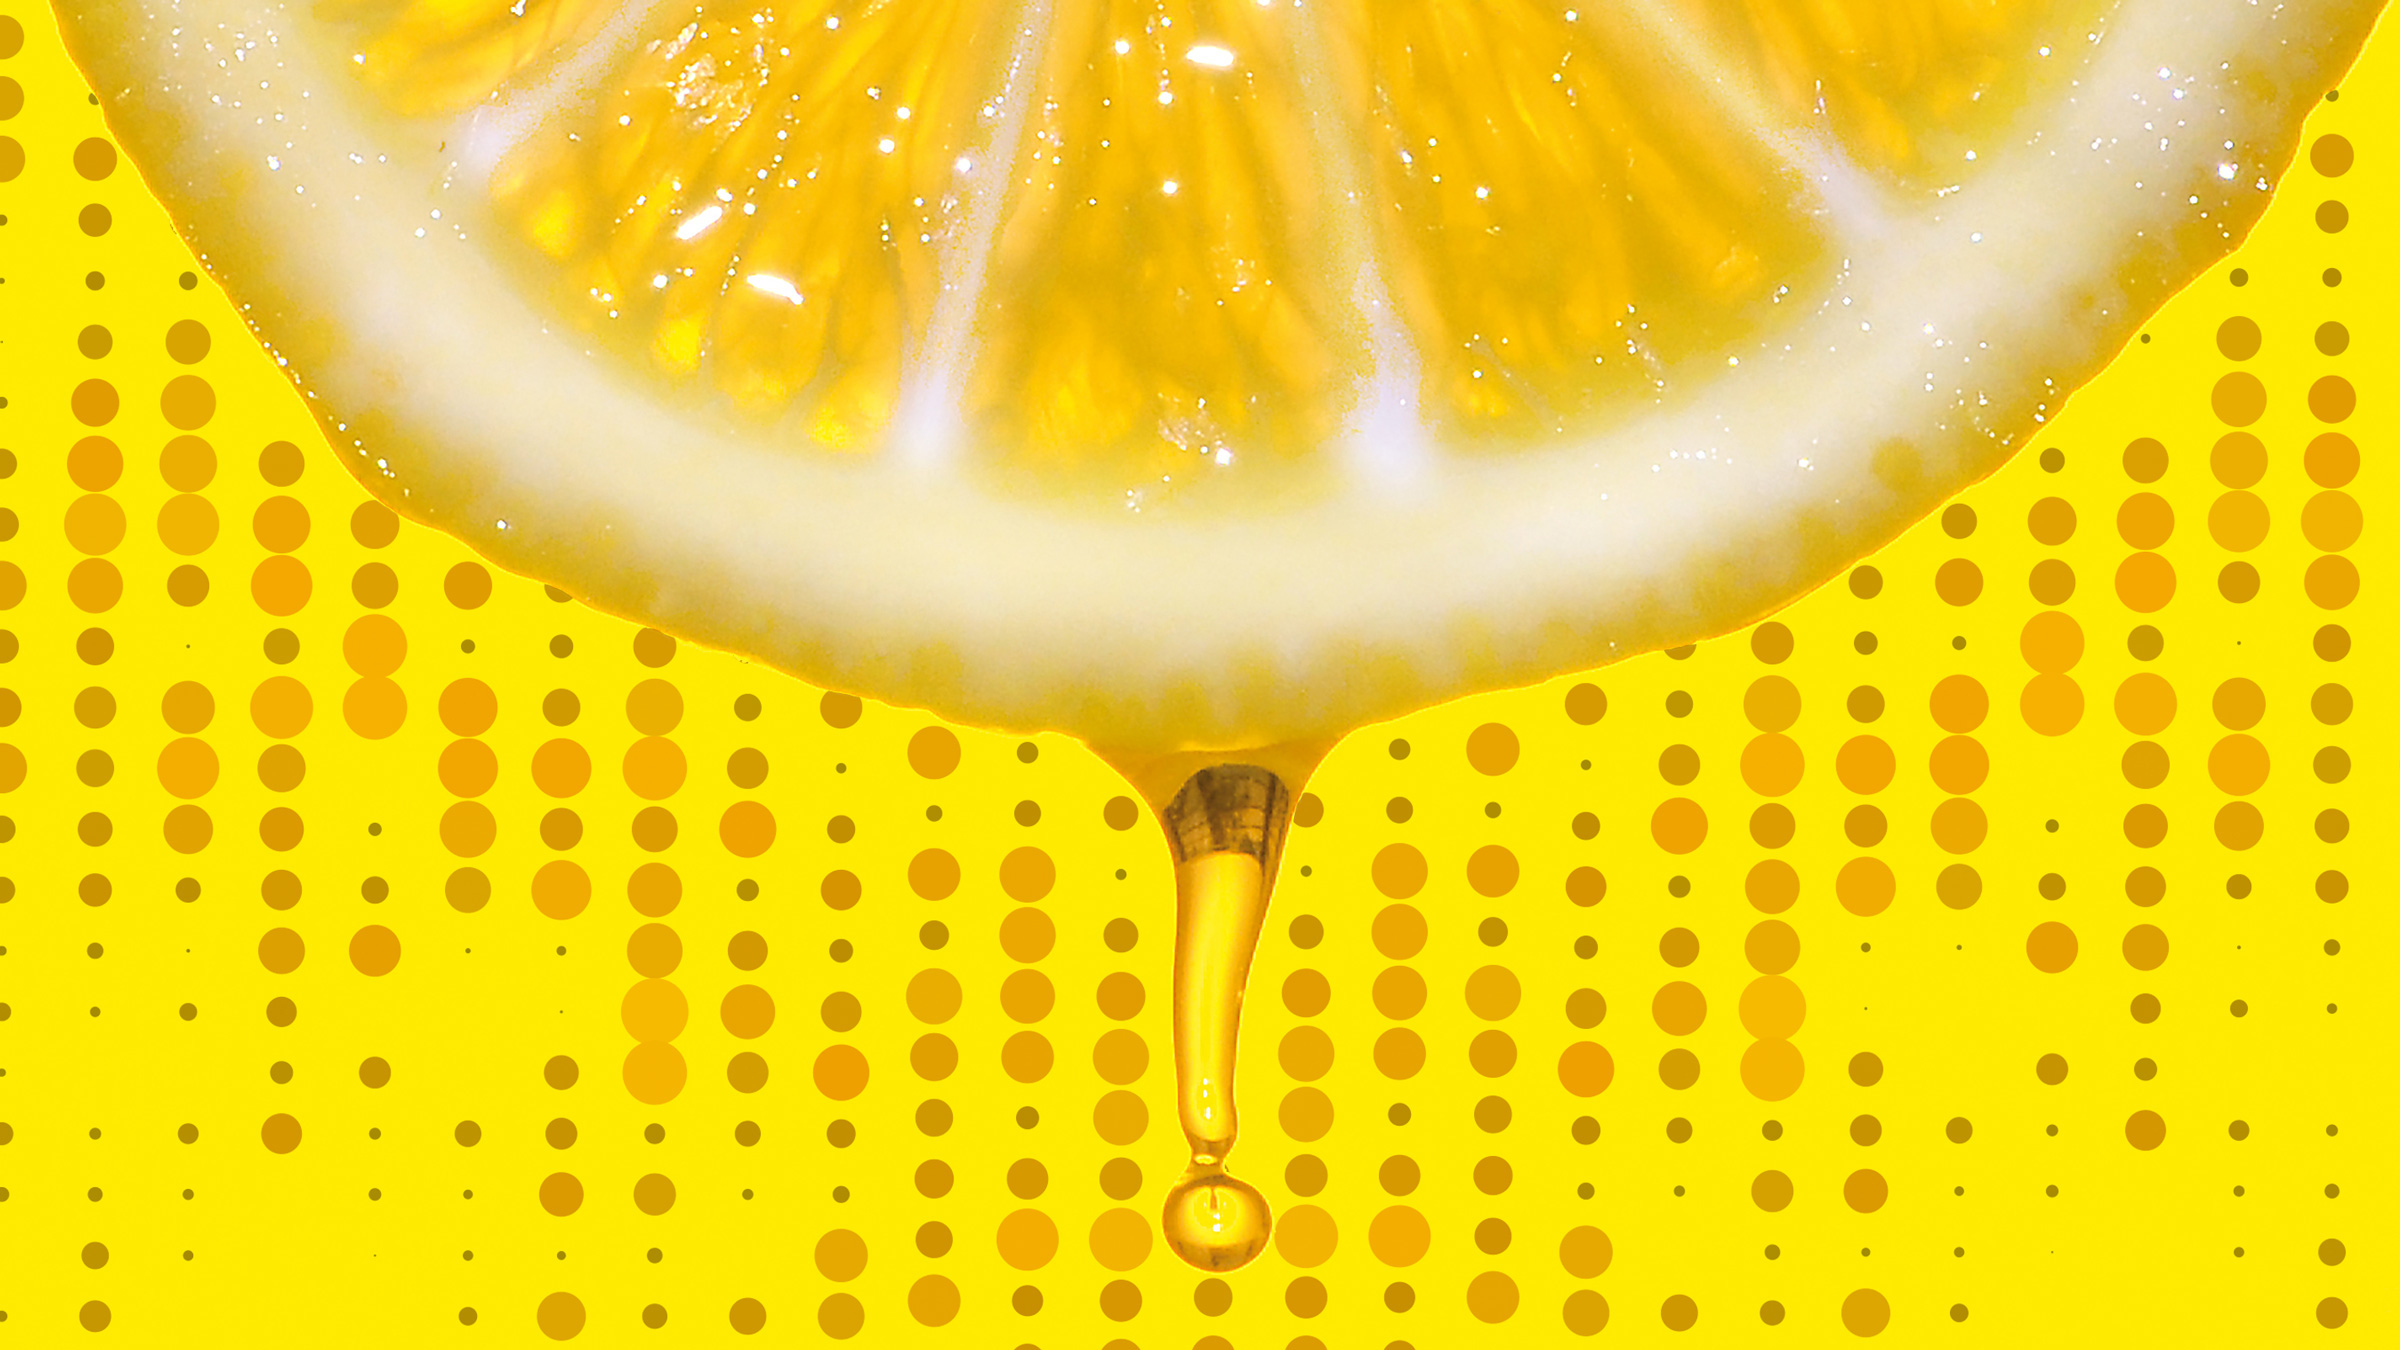 a drop of juice drips from a slice of lemon